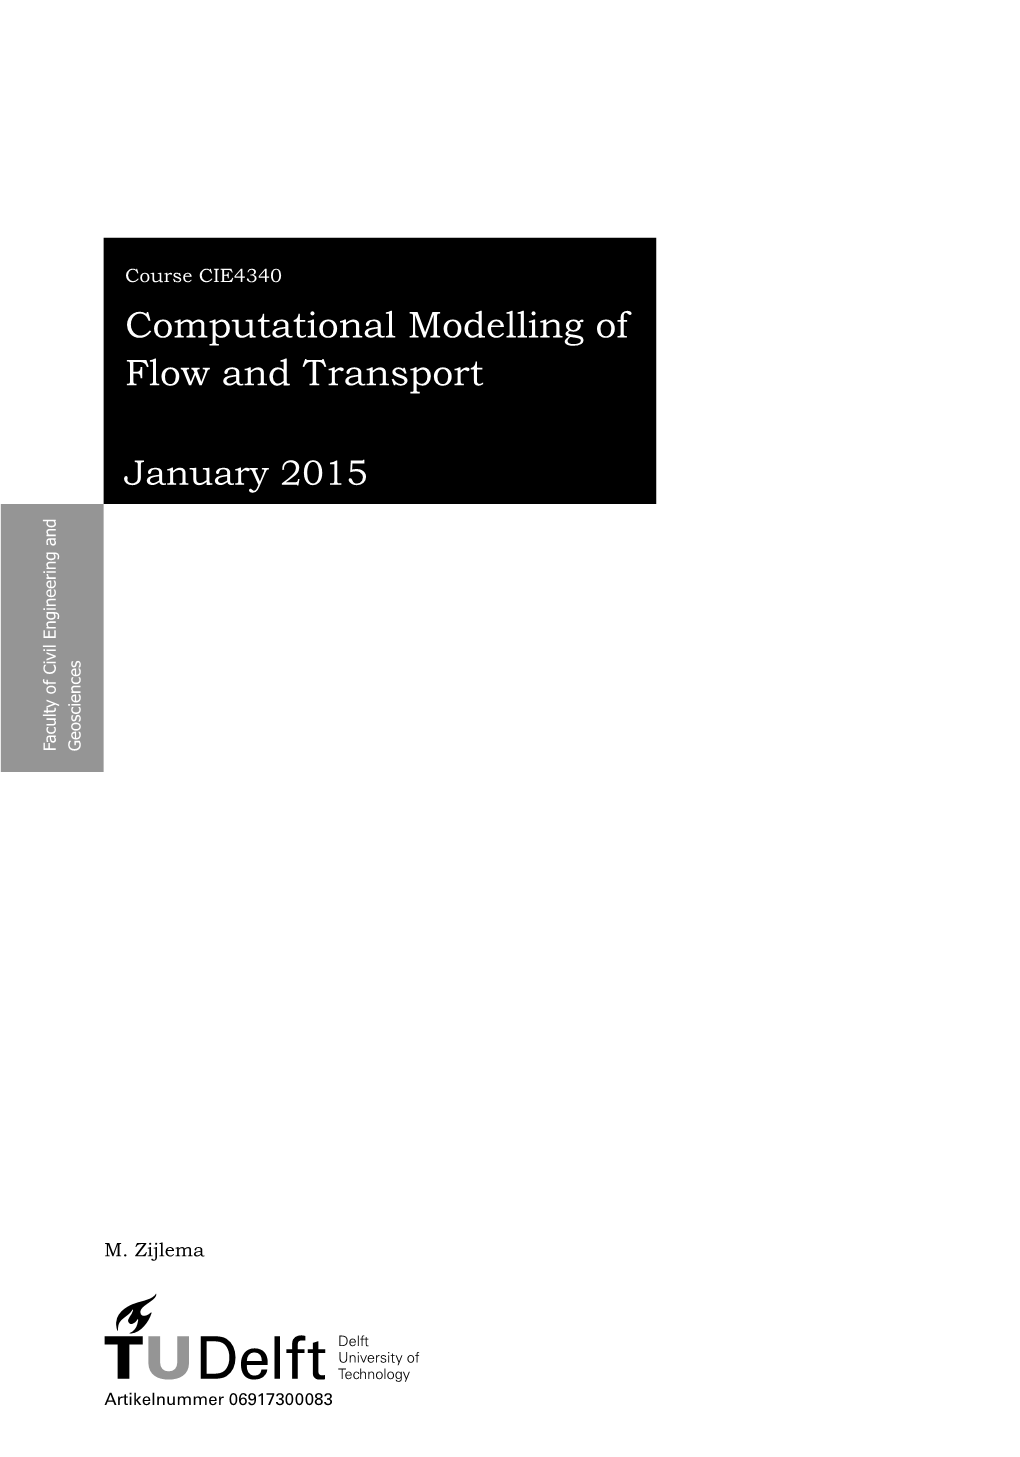 Computational Modelling of Flow and Transport